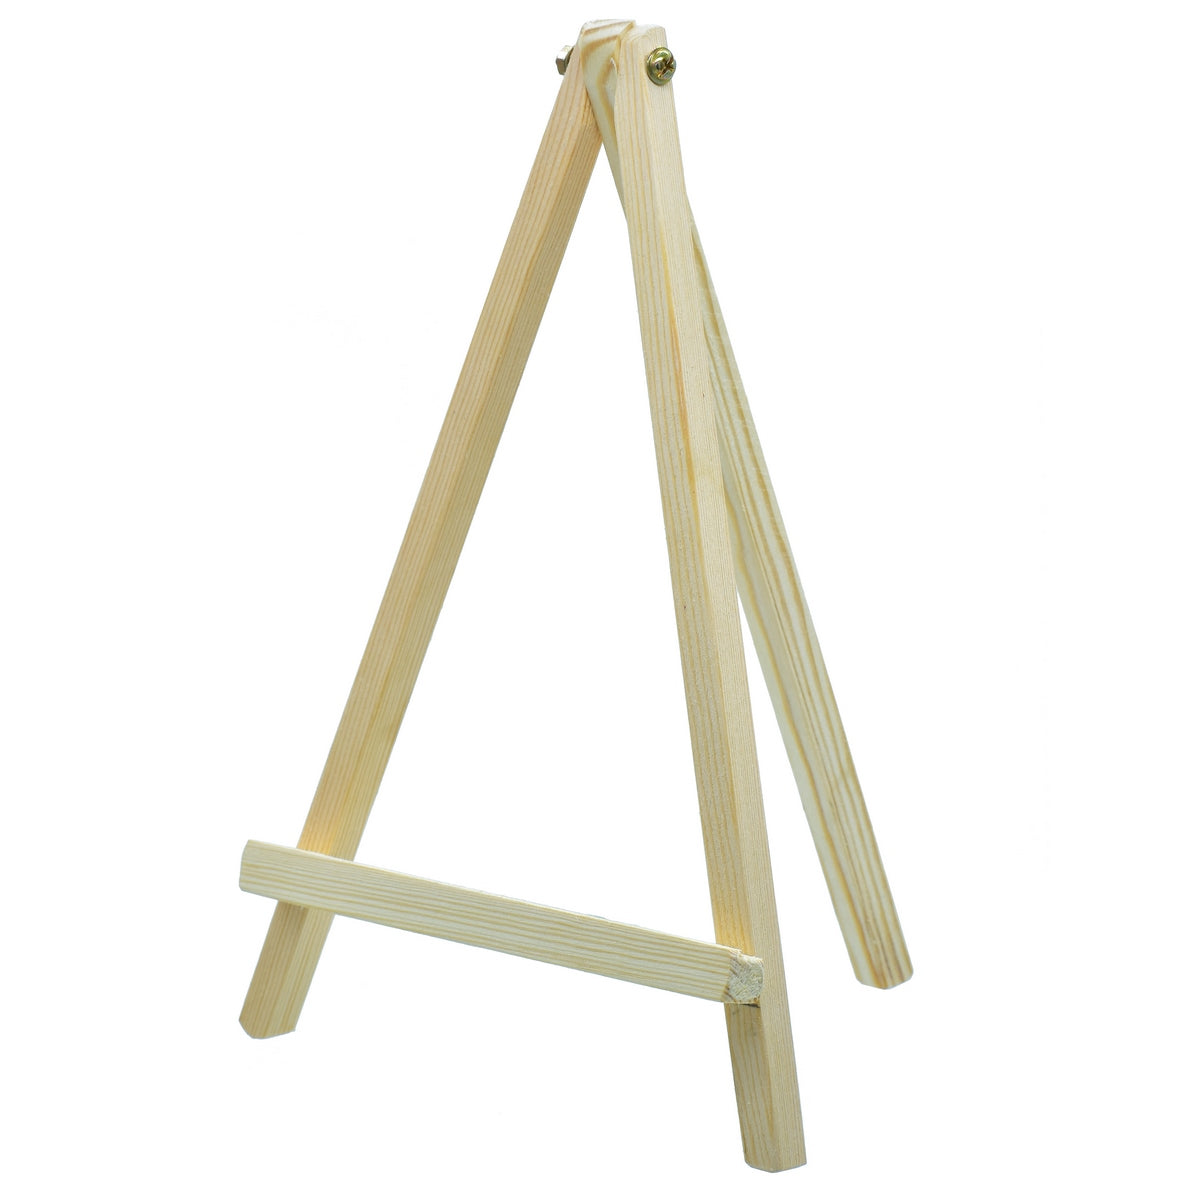 jags-mumbai Easel Wooden Easel Stand(10-inch)